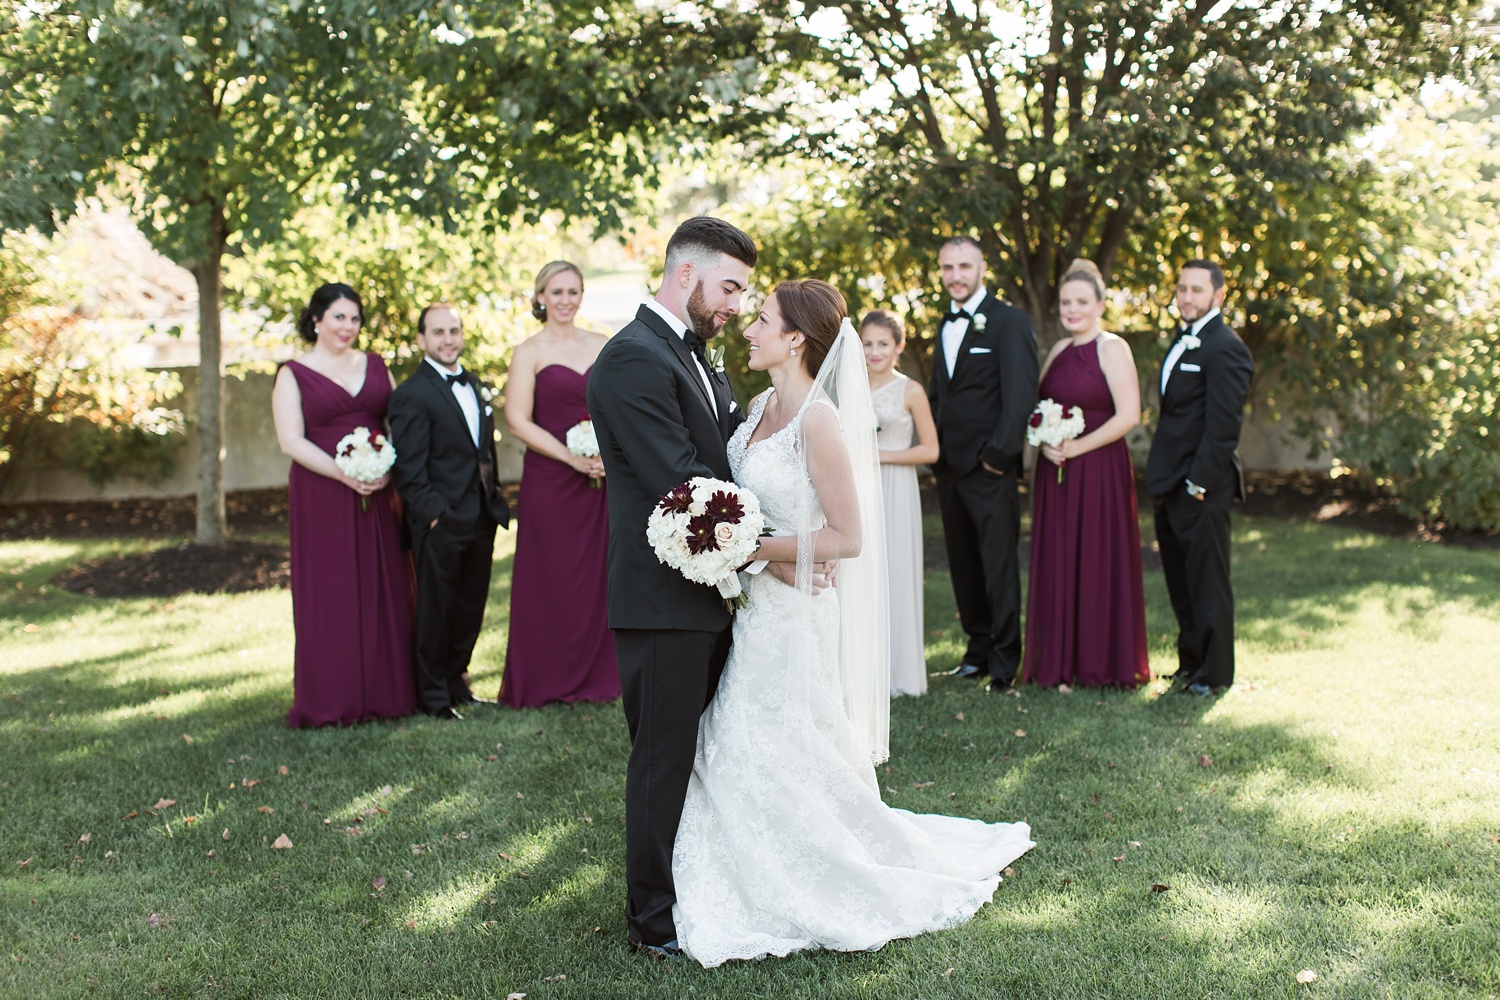 Cranberry and Cream Fall Wedding | Blue Bell Country Club Wed ding Photography | Nicole and Mike